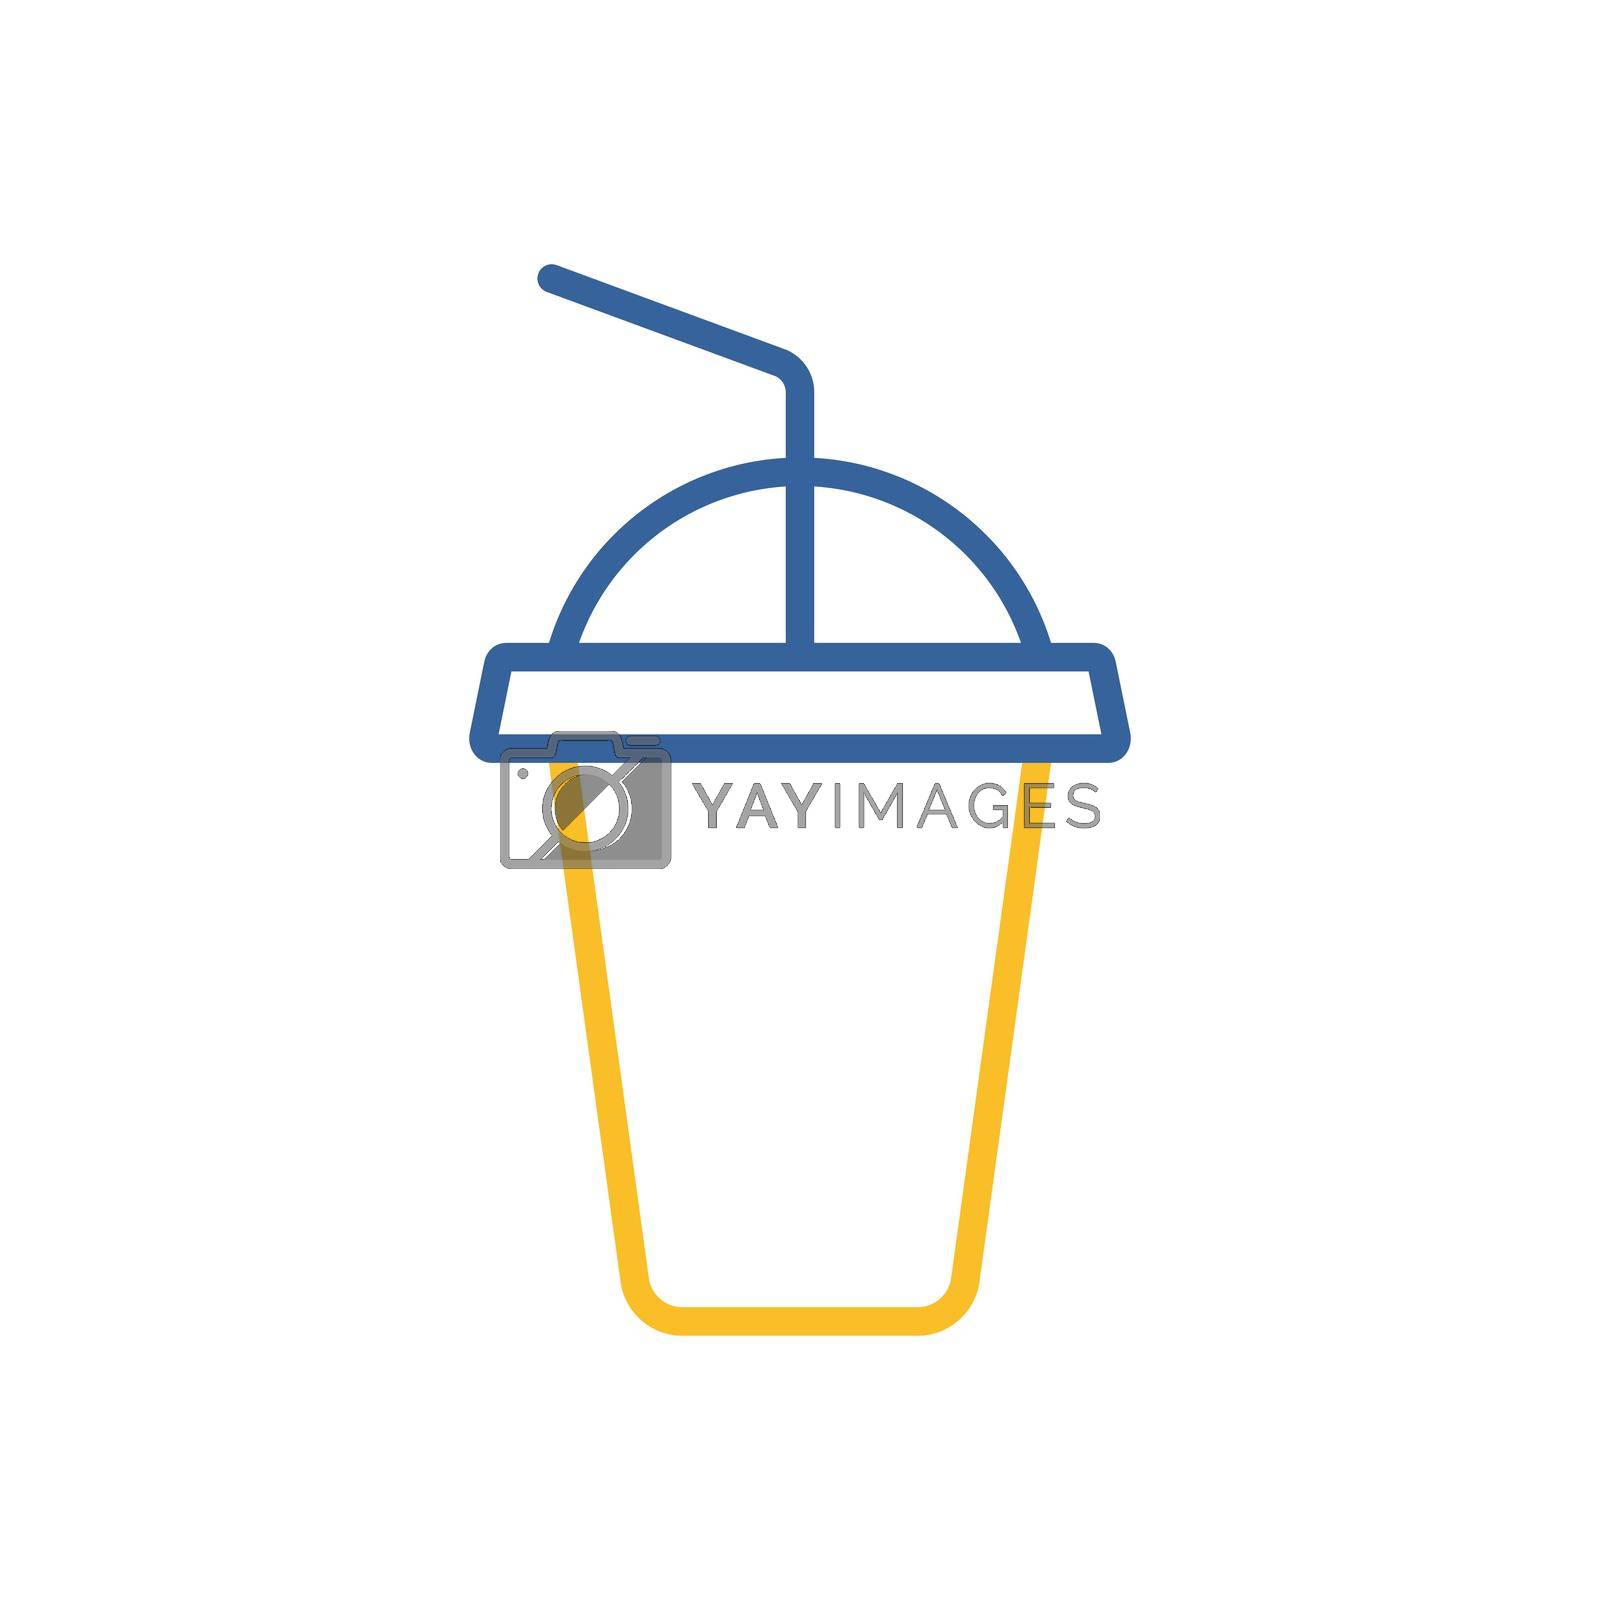 Soft drink vector flat icon. Fast food sign. Graph symbol for cooking web site and apps design, logo, app, UI